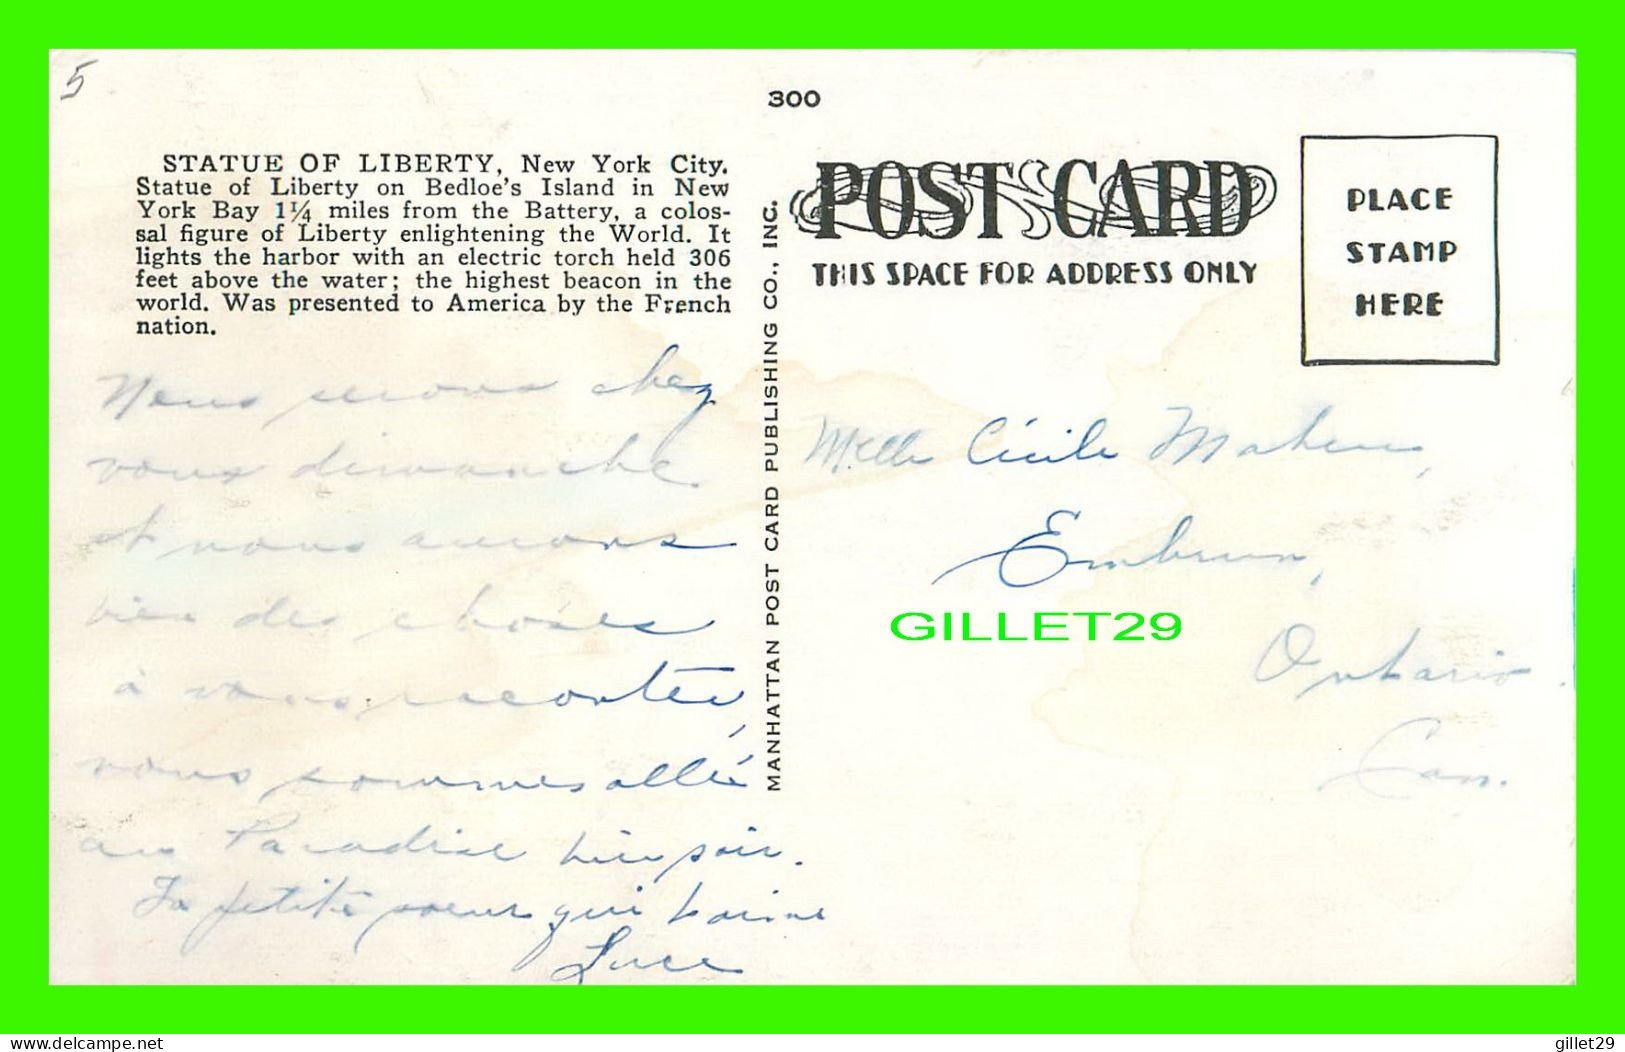 NEW YORK CITY, NY - STATUE OF LIBERTY WITH AIRSHIP - WRITTEN -  MANHATTAN POST CARD PUB. CO INC - - Statue Of Liberty